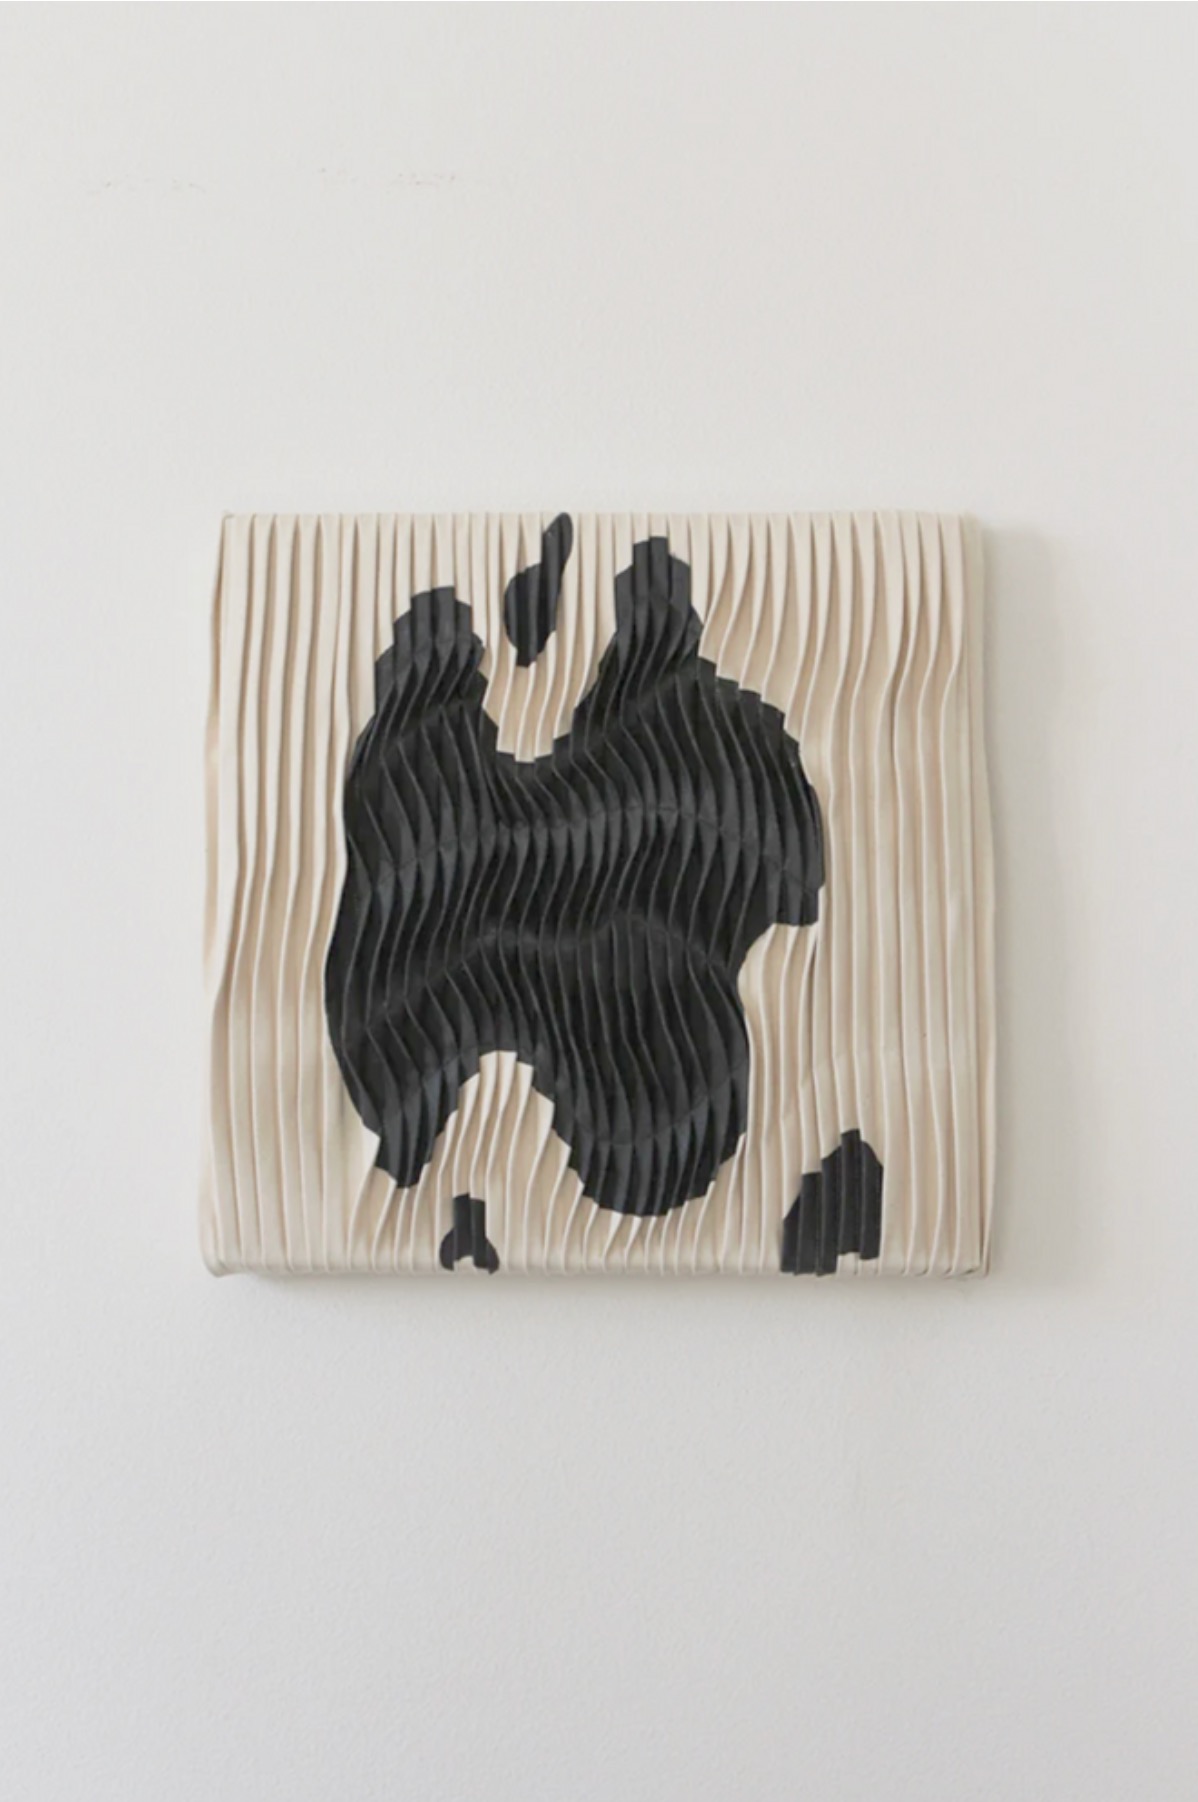 Pleated Wall Sculpture 3